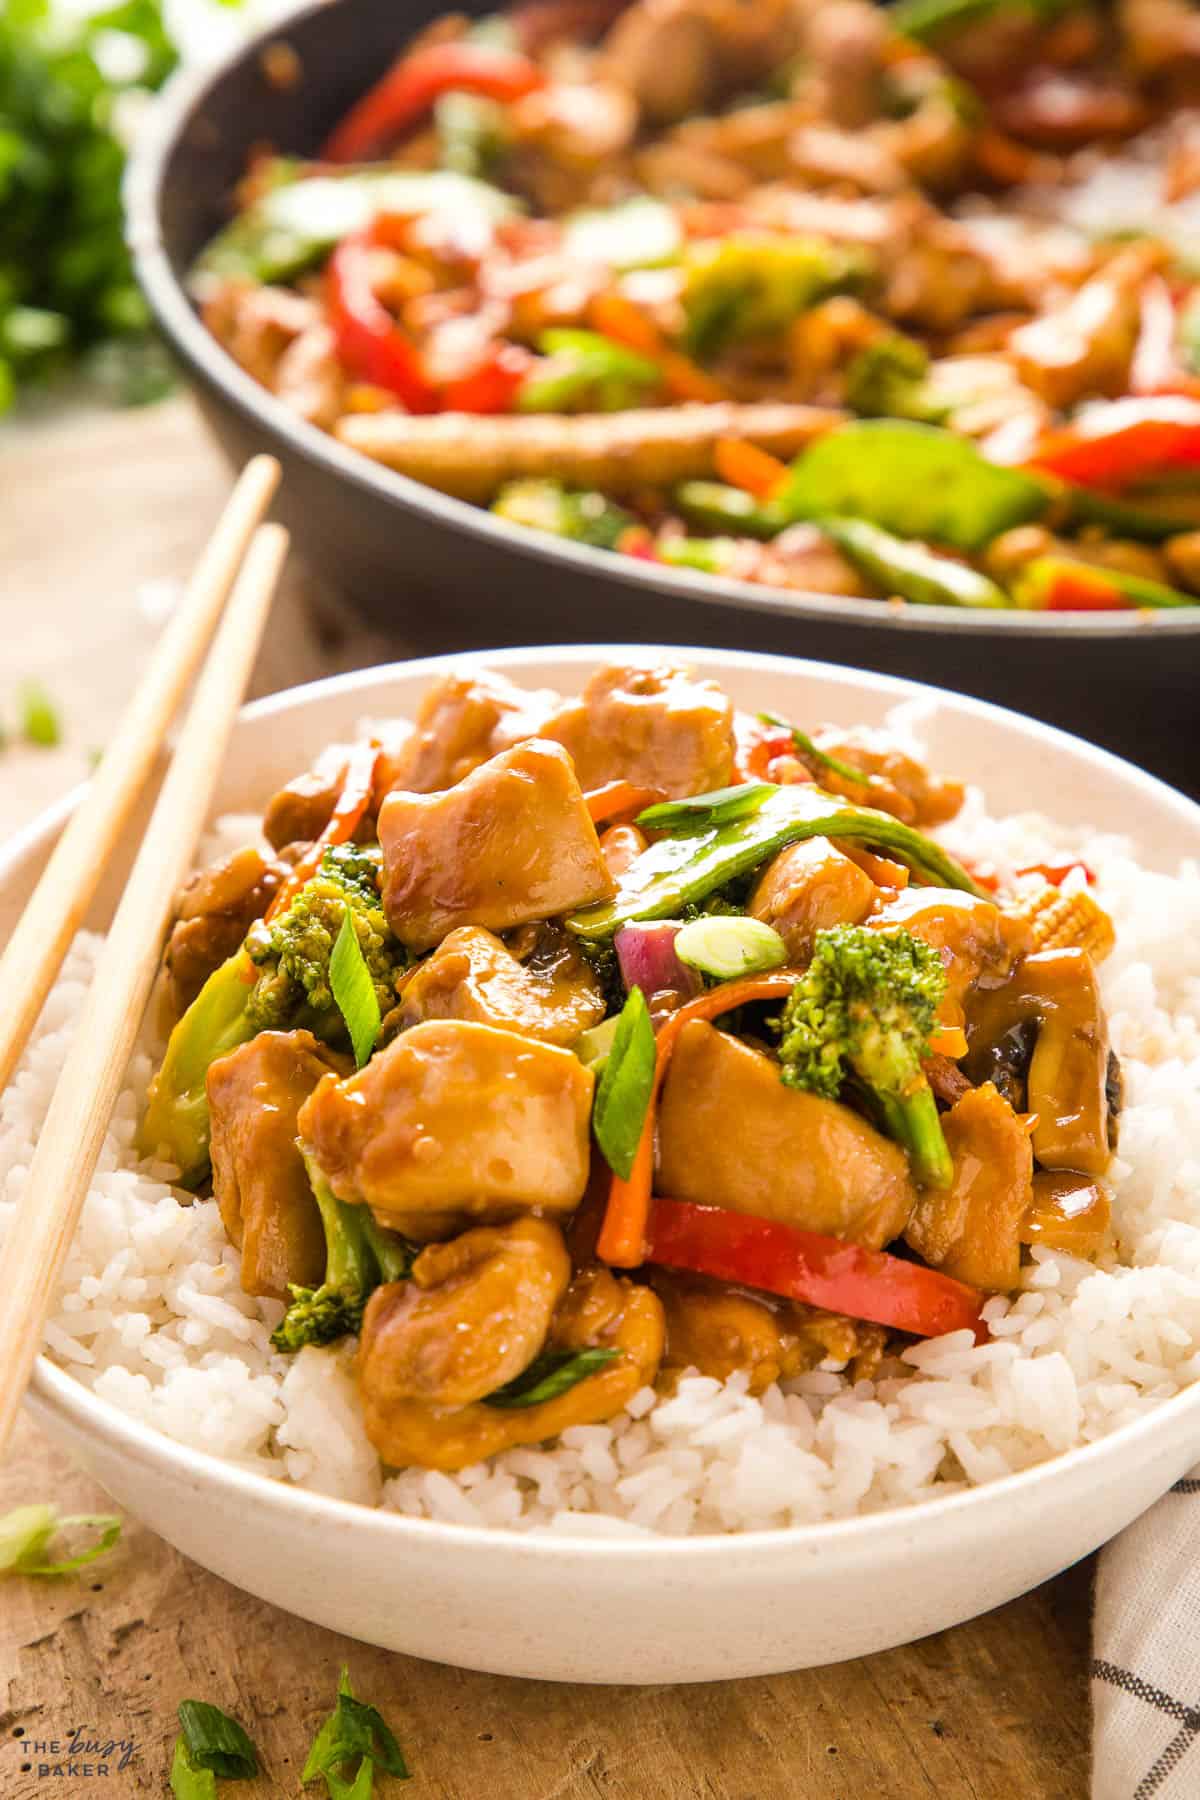 chicken stir fry with veggies and rice and sauce